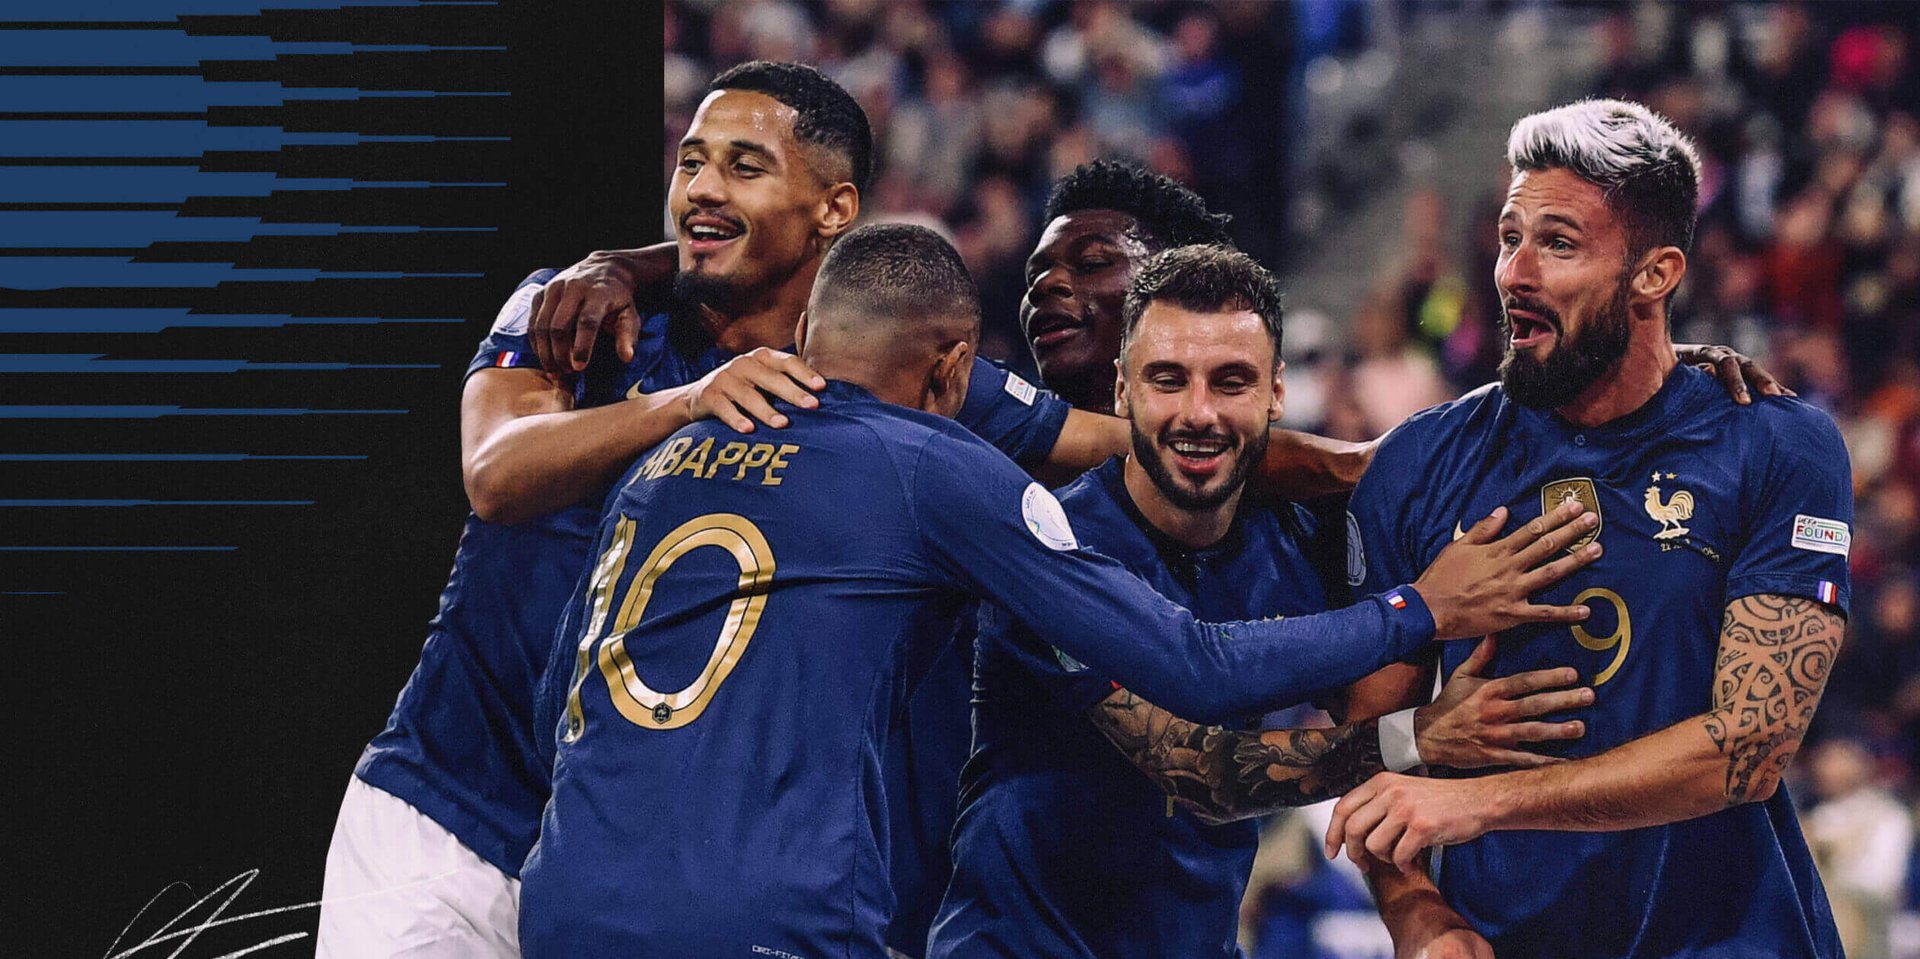 France 2022 World Cup squad guide: The Orange were due to advance or go home early again